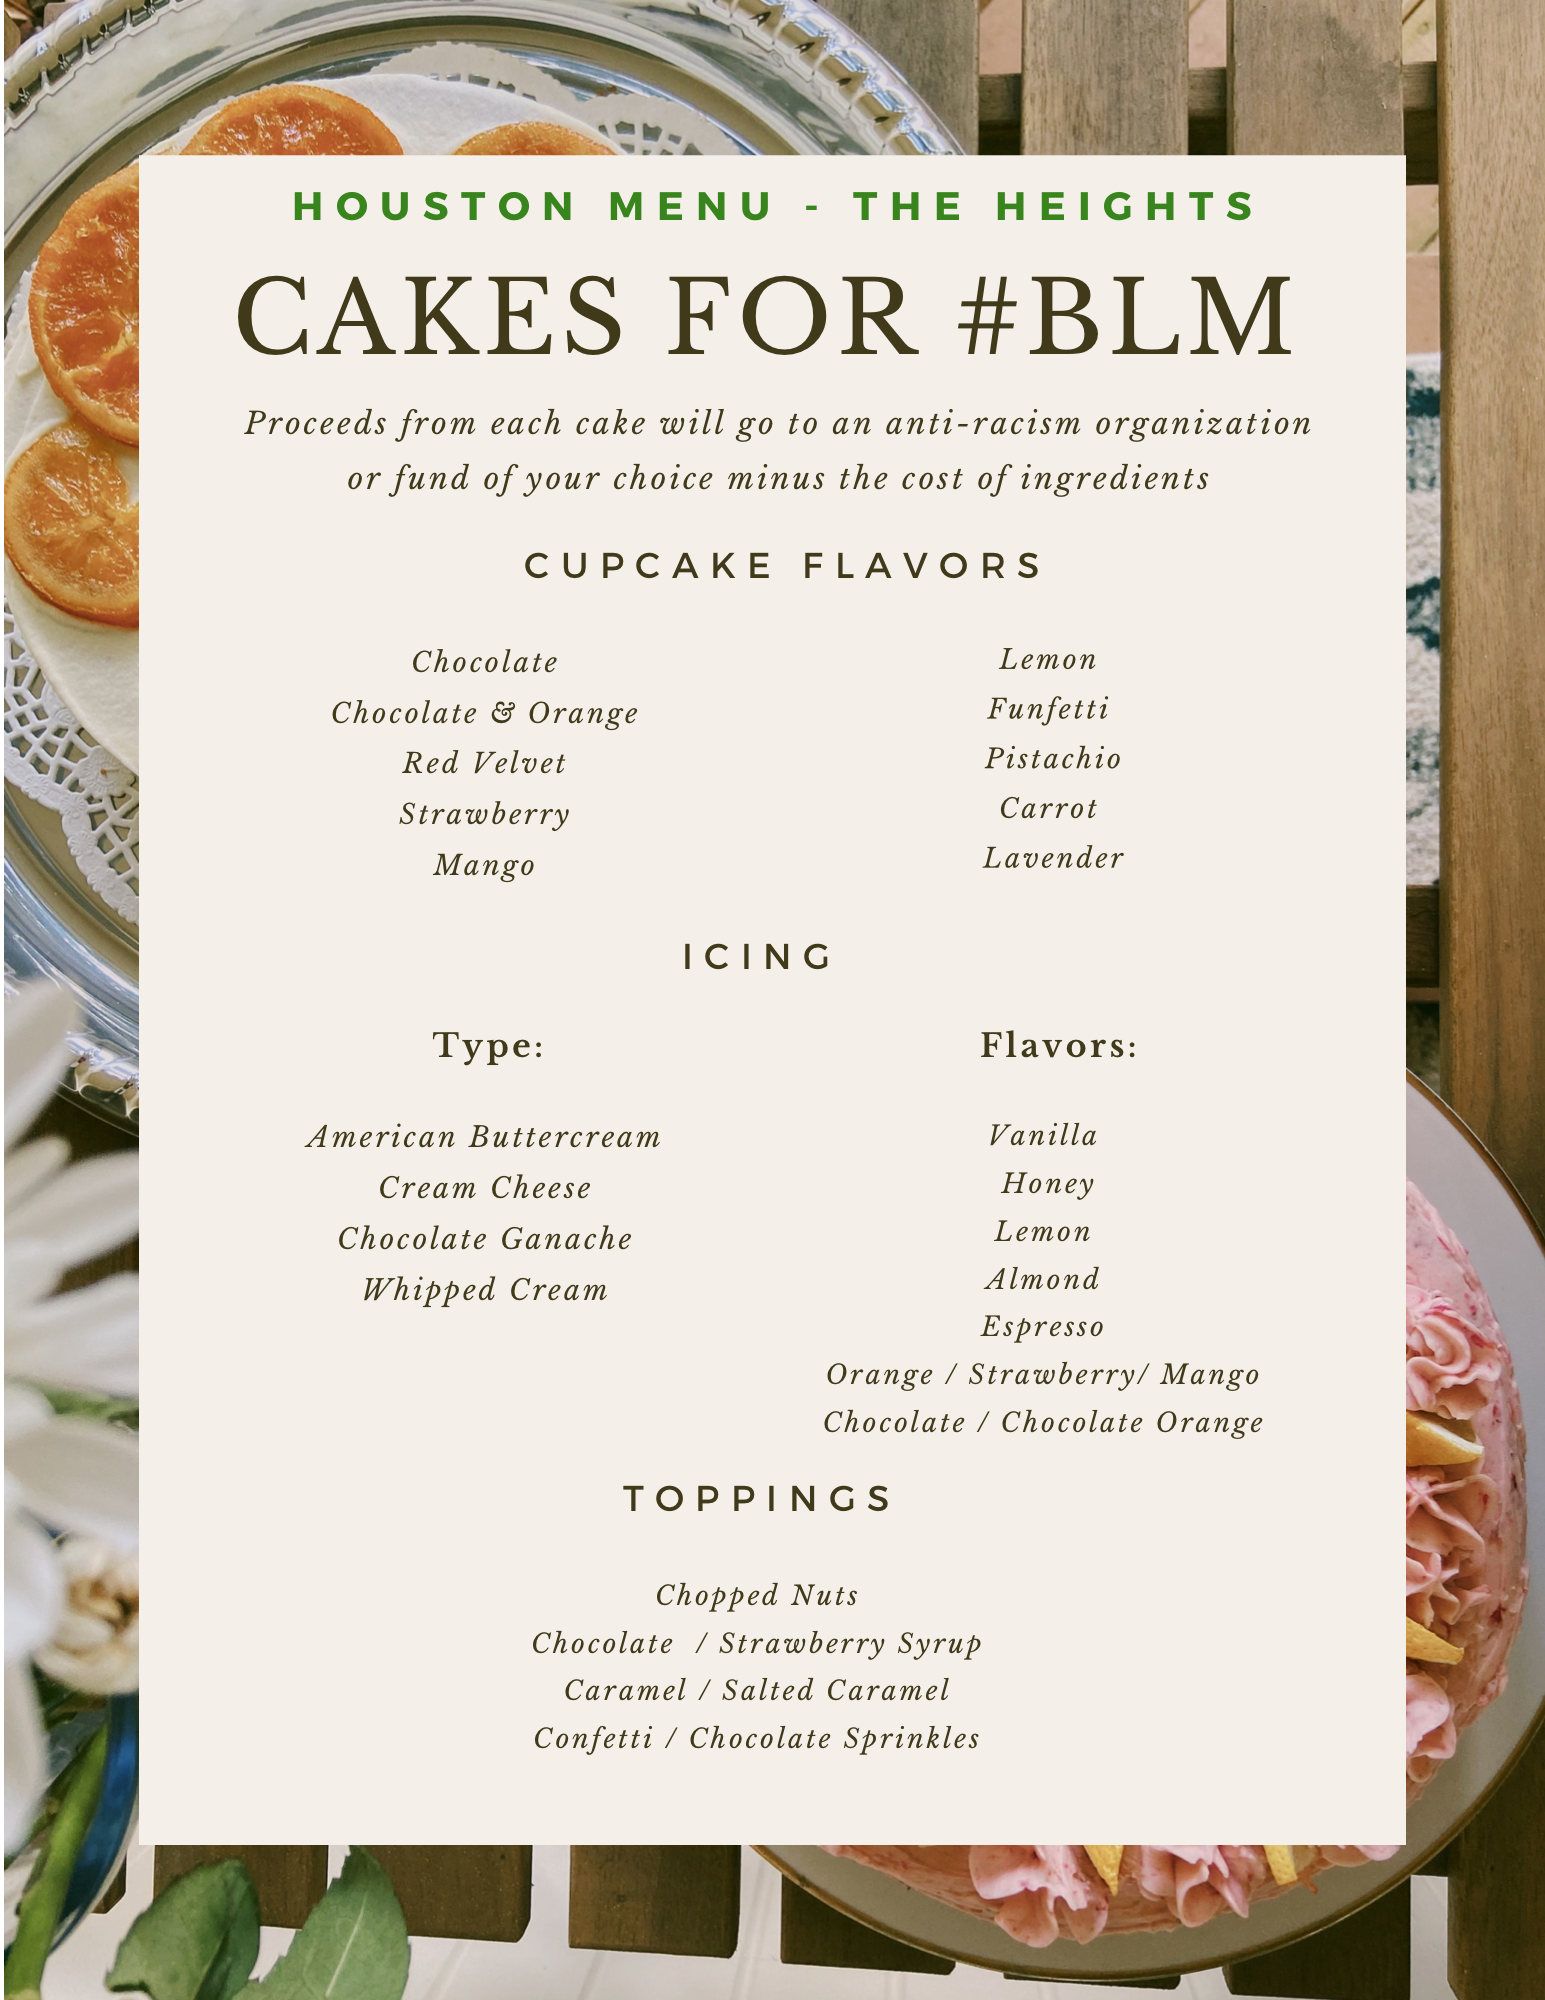 Cakes for BLM - Houston, Texas - The Heights menu